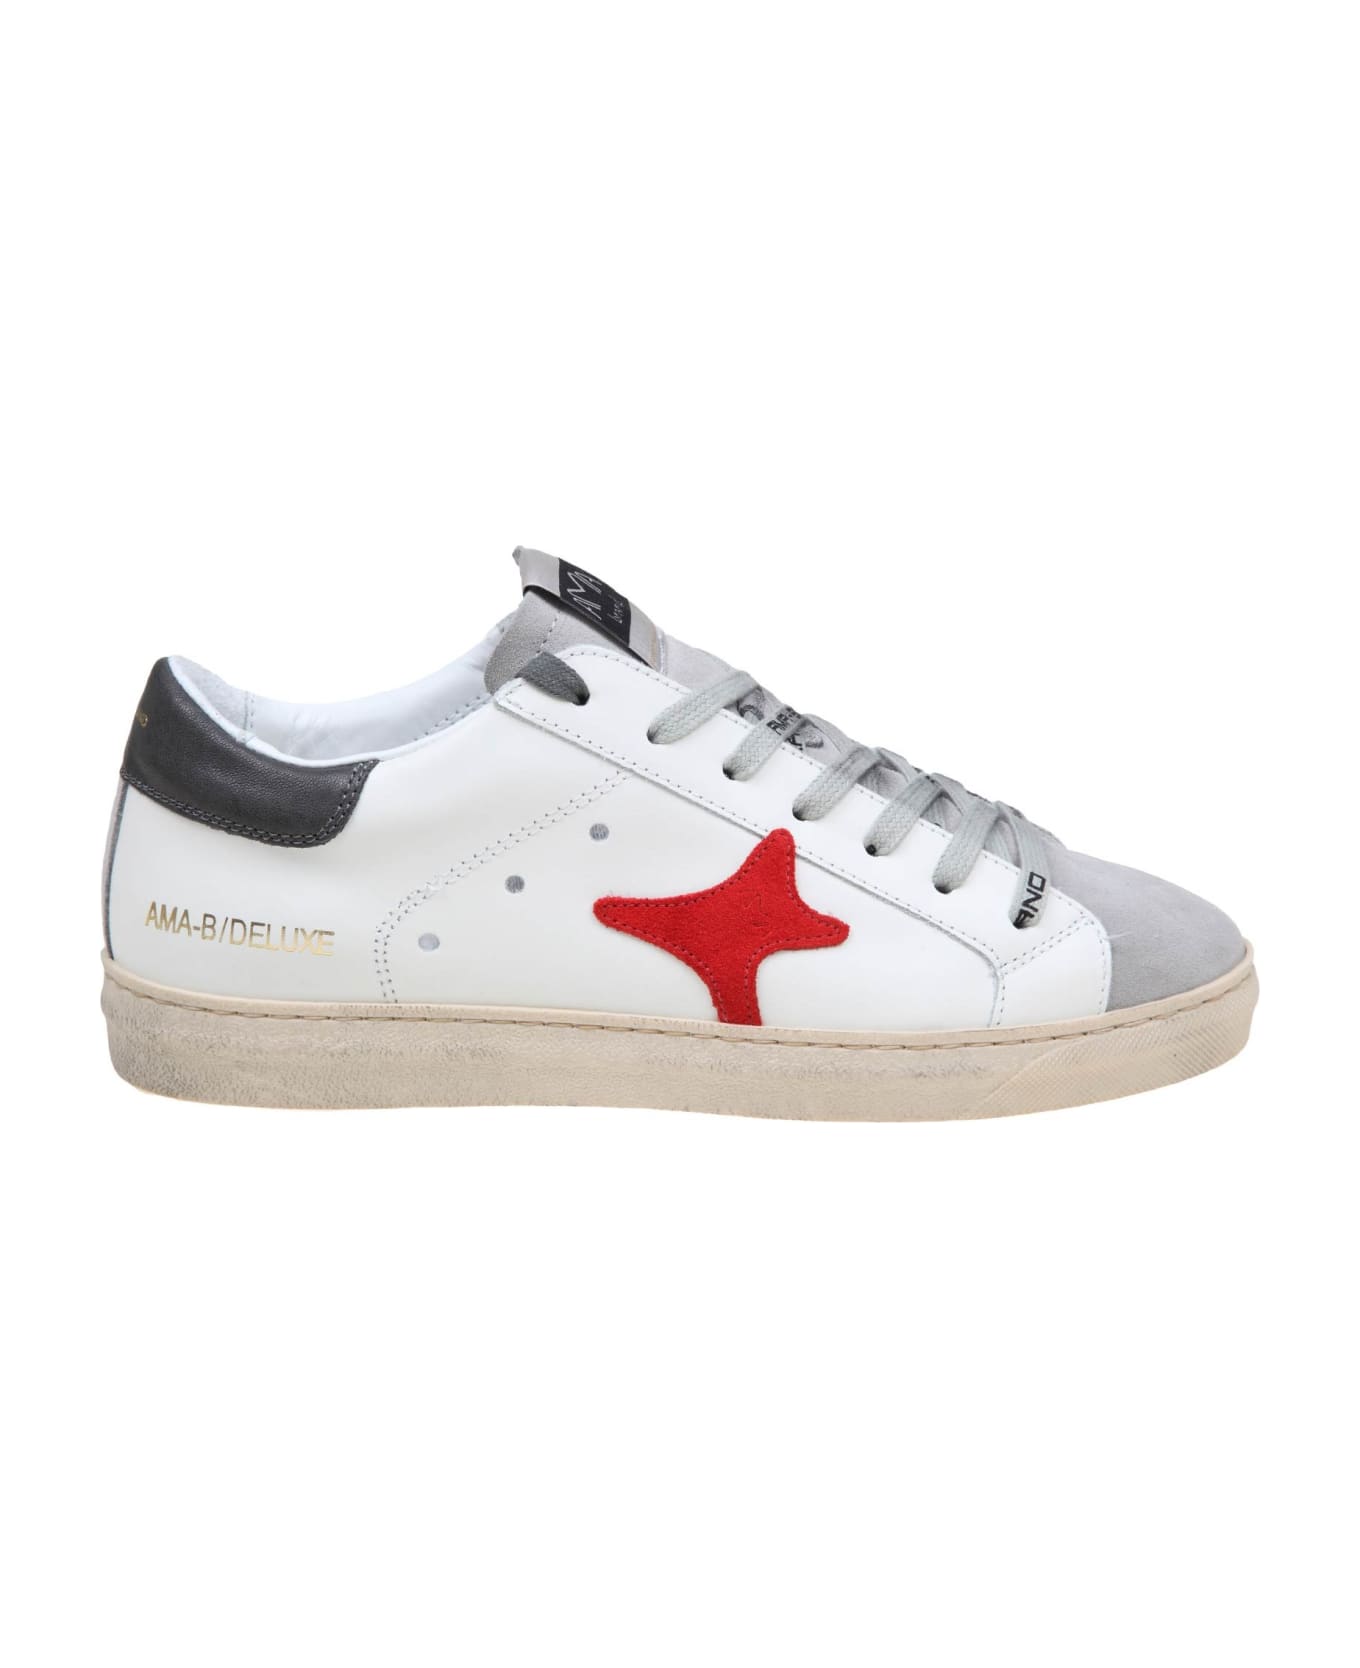 AMA-BRAND White And Red Leather Sneakers - White/Grey